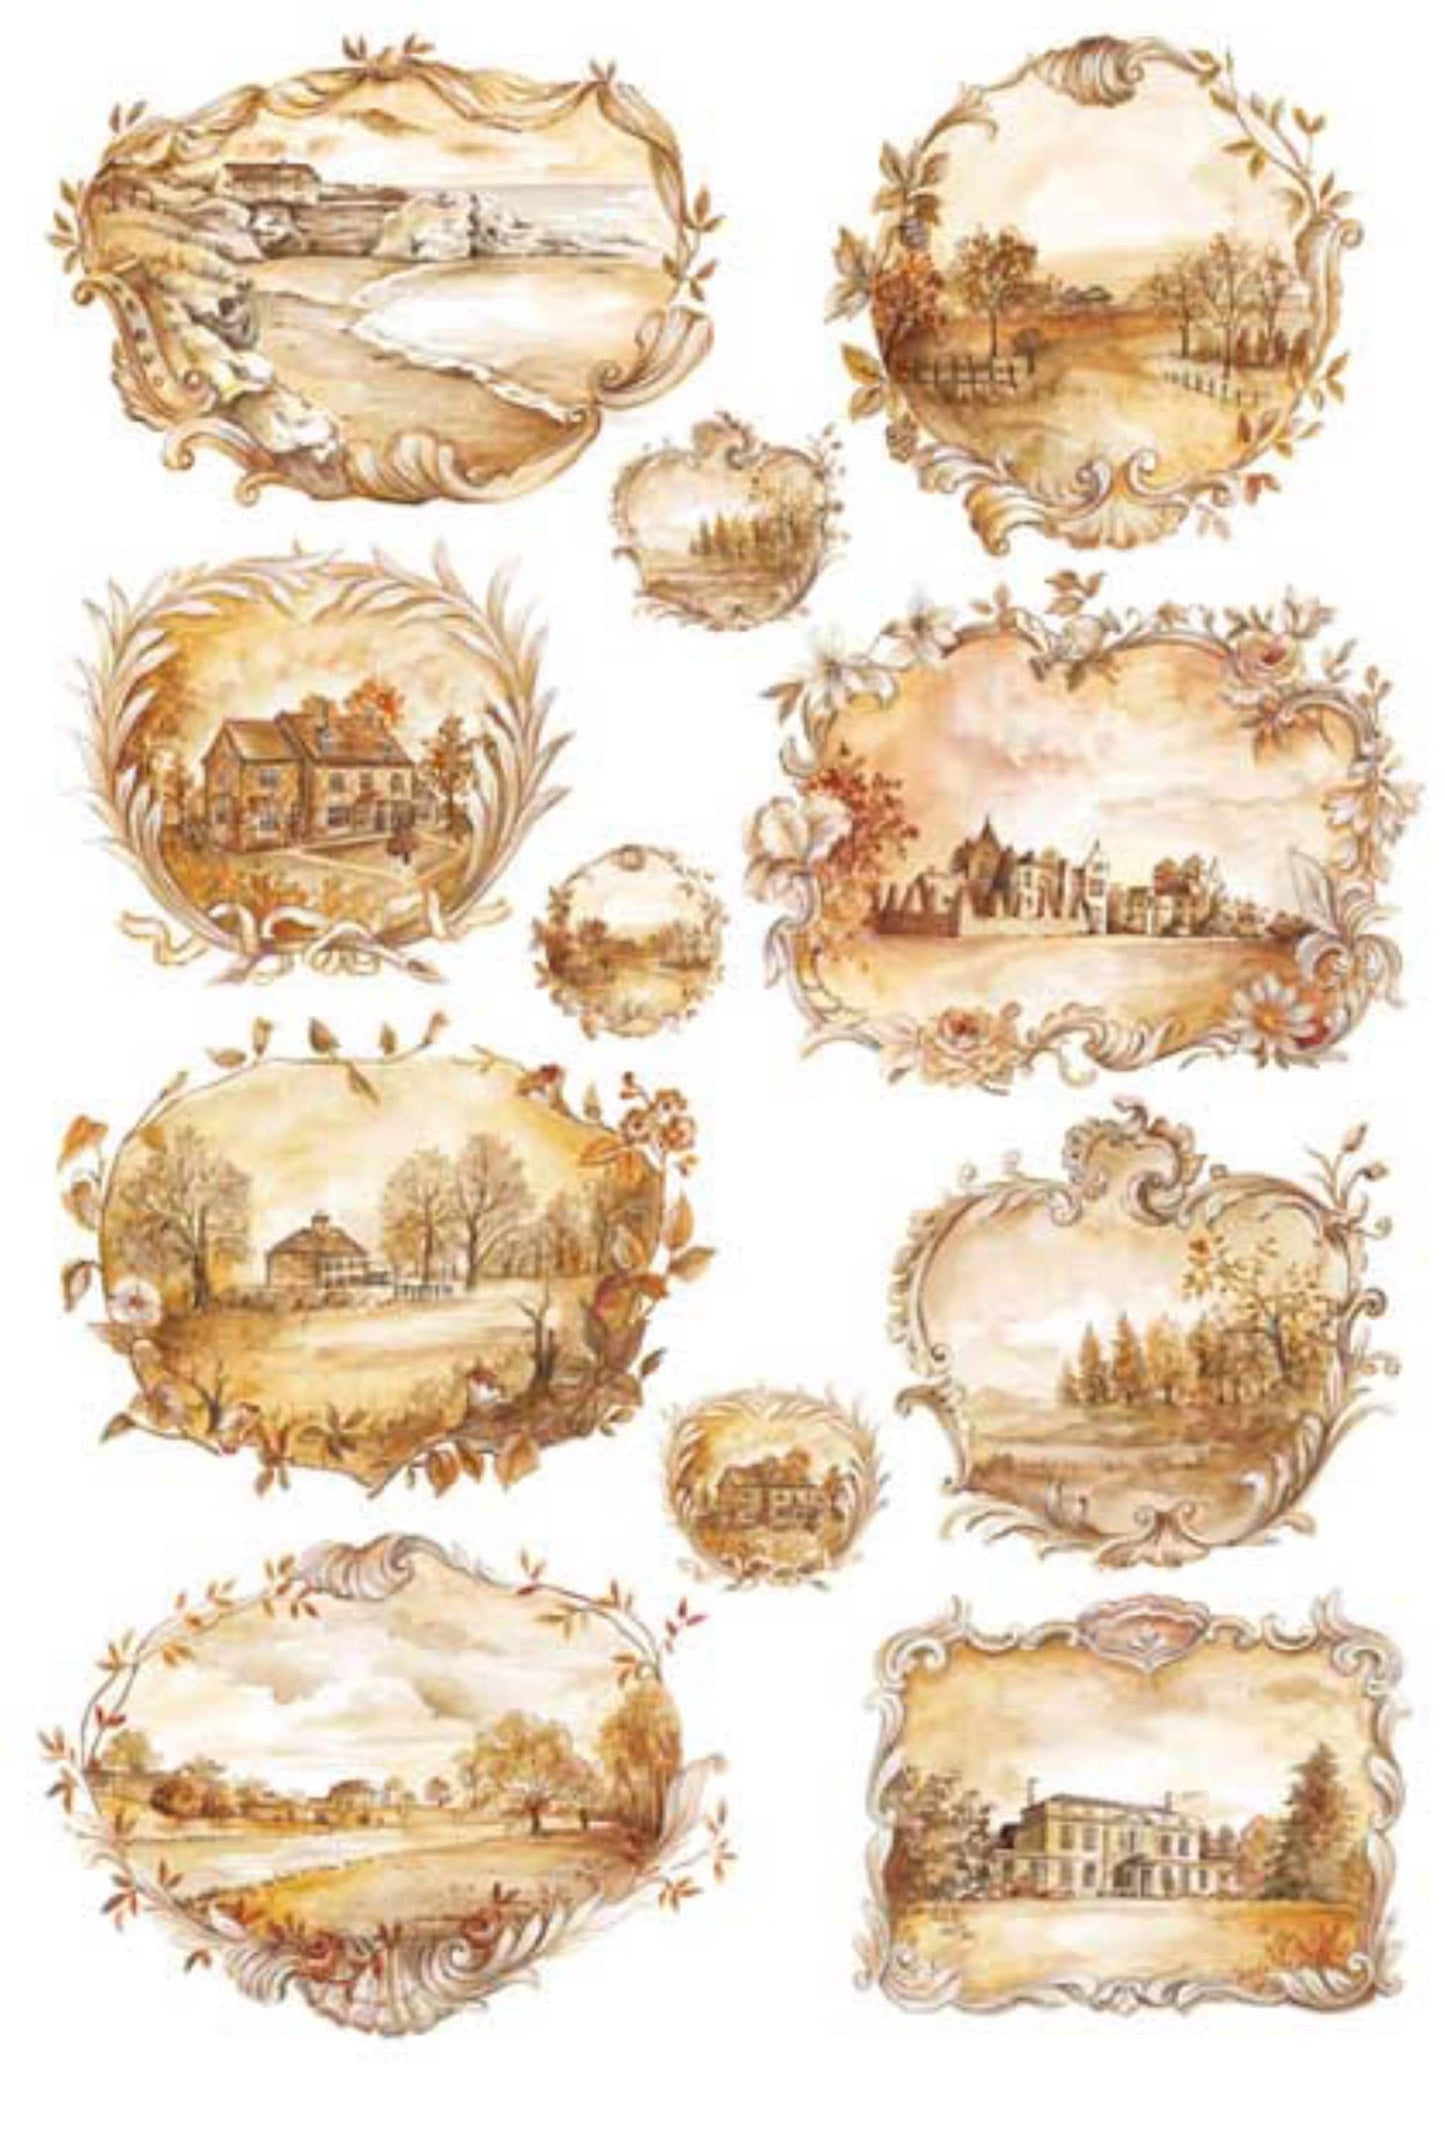 Calambour, BIGsmall Collection, Vintage style Framed Landscapes Rounds, squares, PAU 15 Rice Paper Decoupage 32 x 45 cm 12.5 x 17 in